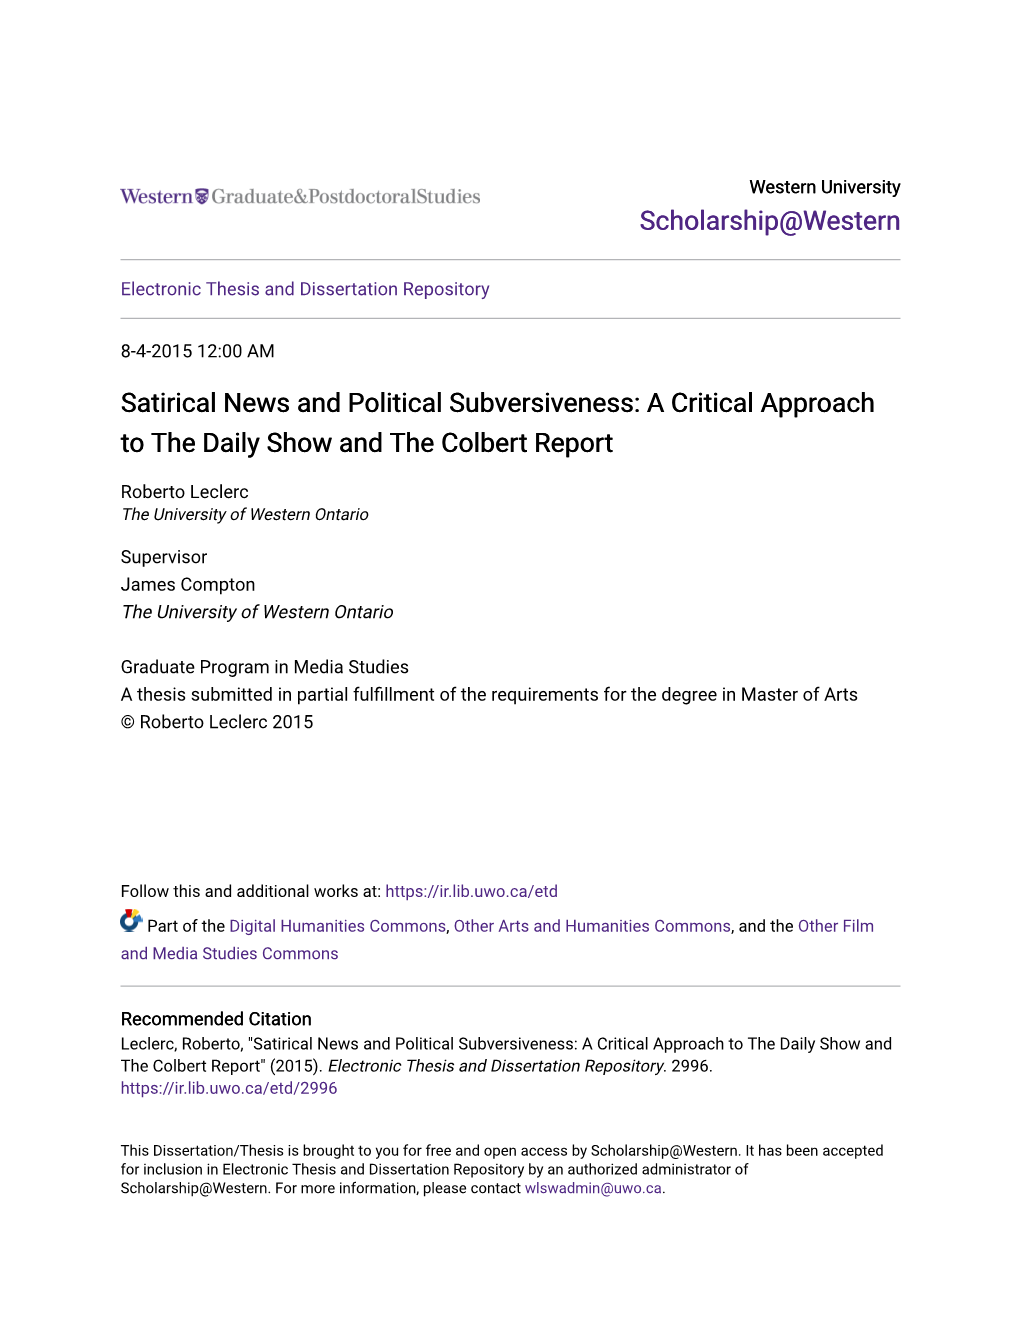 Satirical News and Political Subversiveness: a Critical Approach to the Daily Show and the Colbert Report